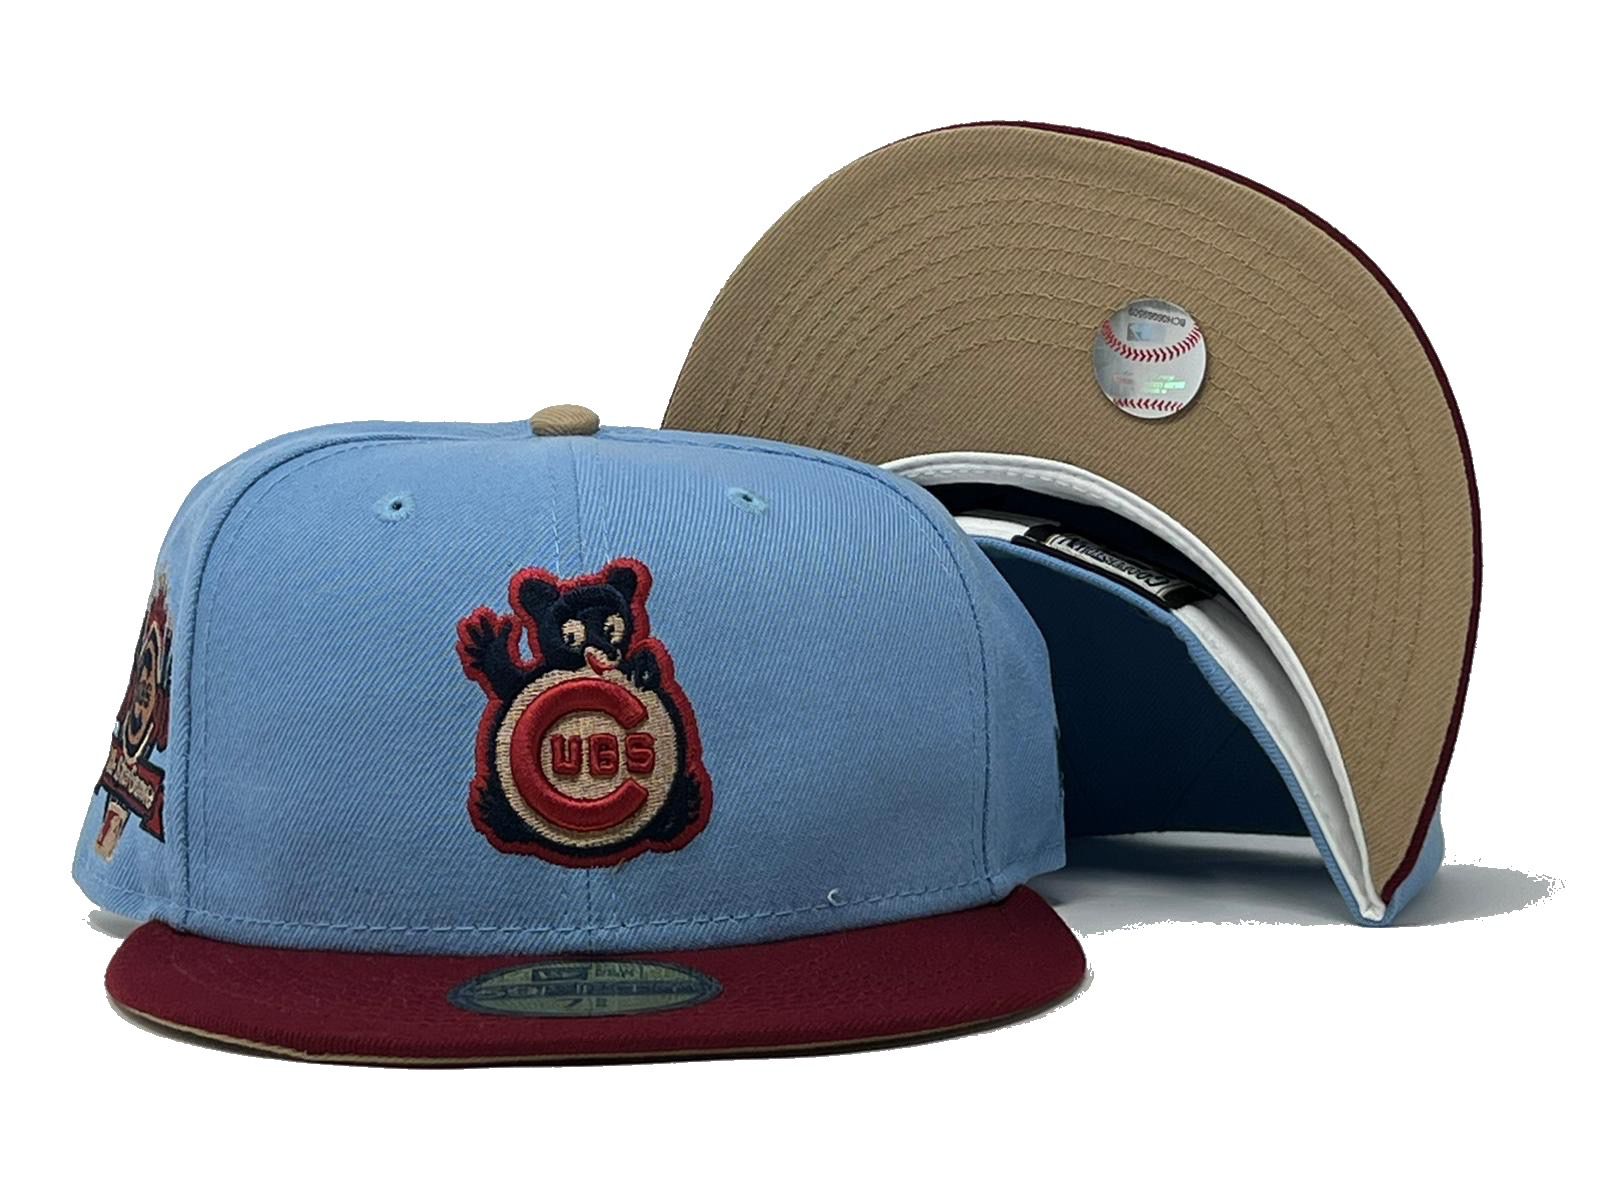 Red Jacket MLB Cubs Fedoras